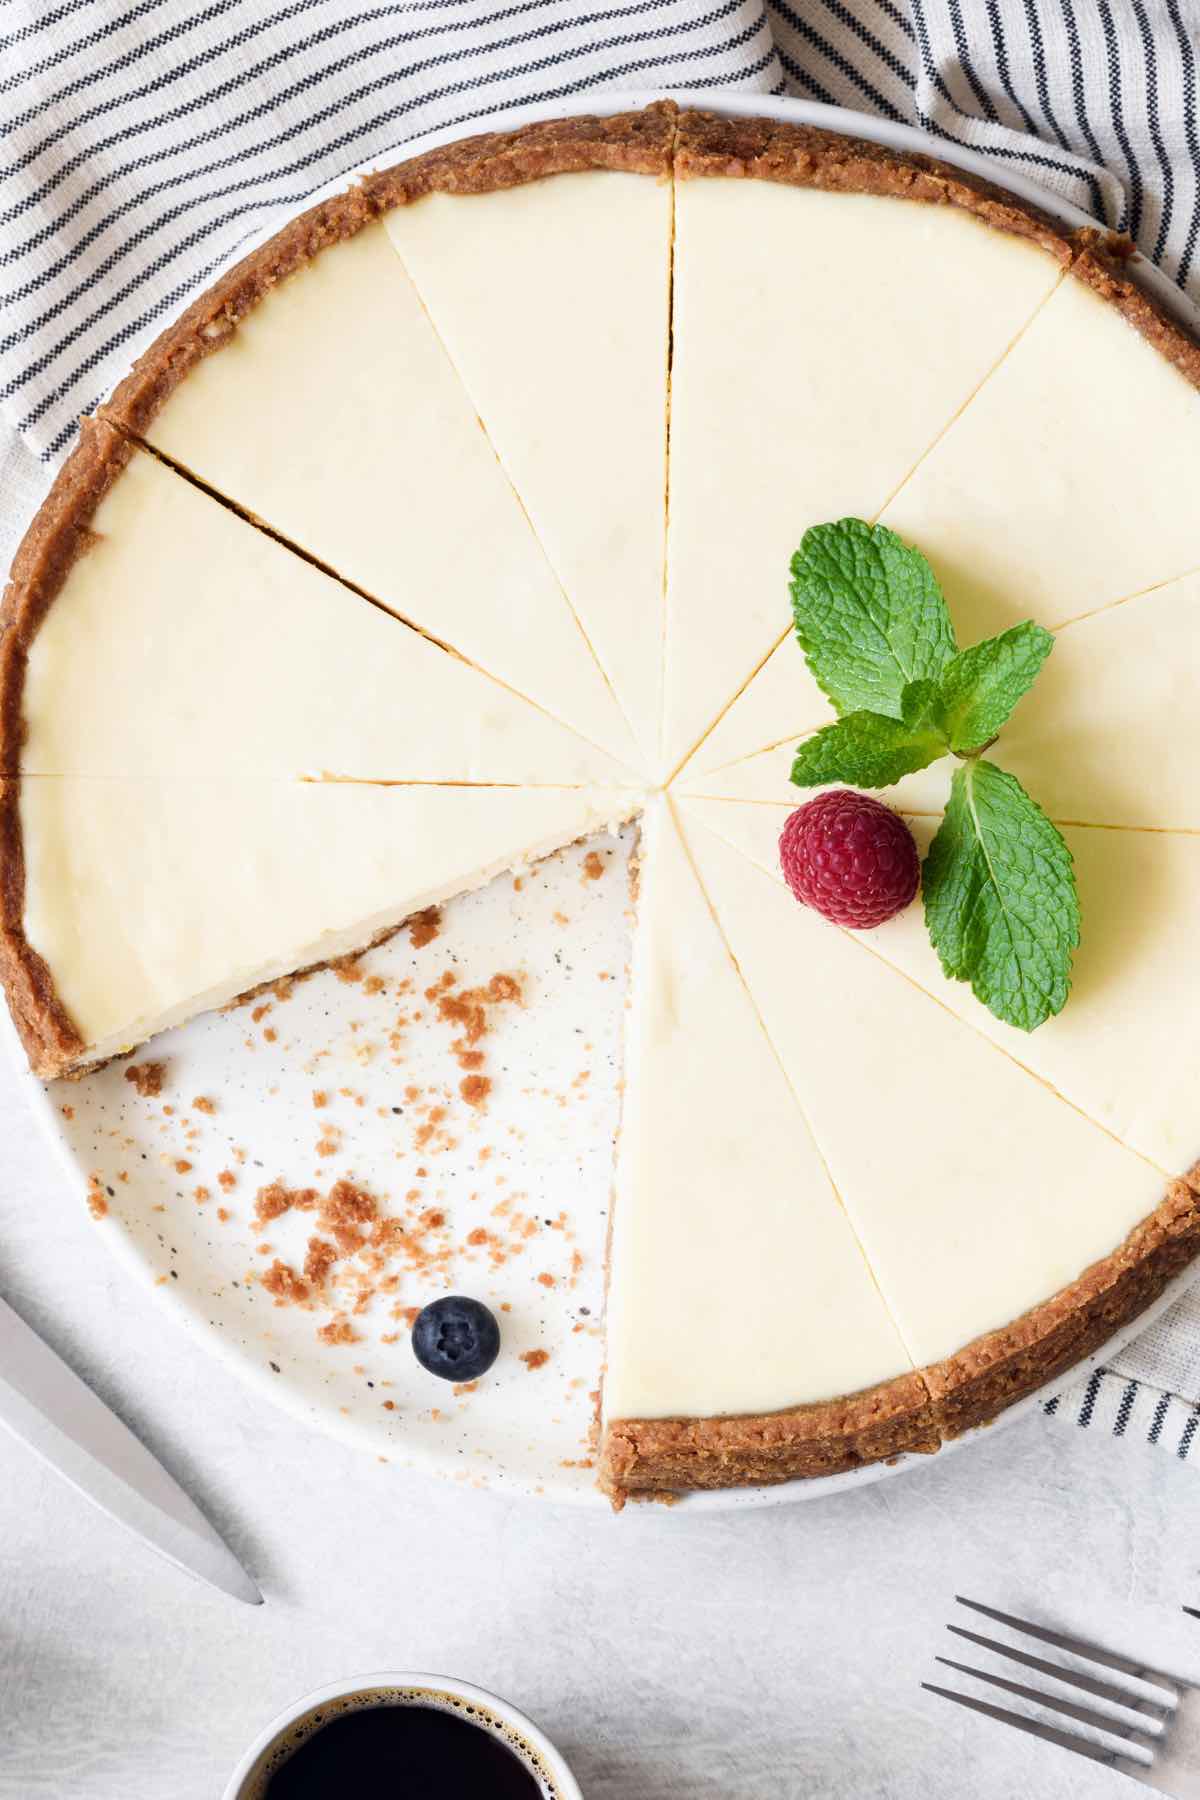 This Cheesecake Filling is creamy, rich, and smooth with a taste that rivals your favorite restaurant or bakery. It’s easy to make and simply bake it with a graham cracker crust for a quick treat after any meal. We’ve also included instructions on how to make a no-bake cheesecake.